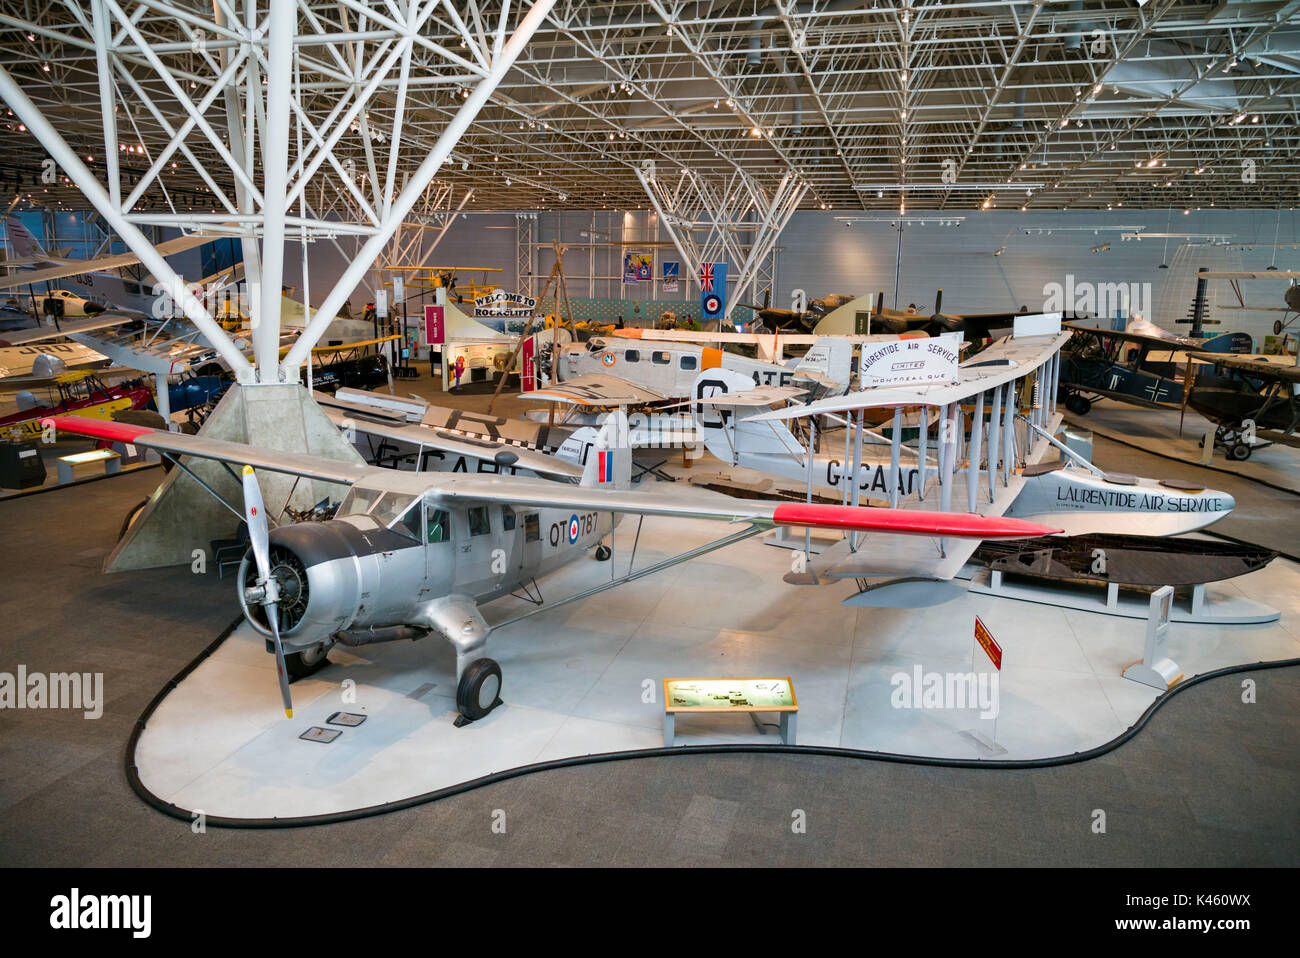 Canada, Ontario, Ottawa, capital of Canada,  Canadian Museum of Aviation,  elevated view of Norseman and Curtiss bush planes Stock Photo